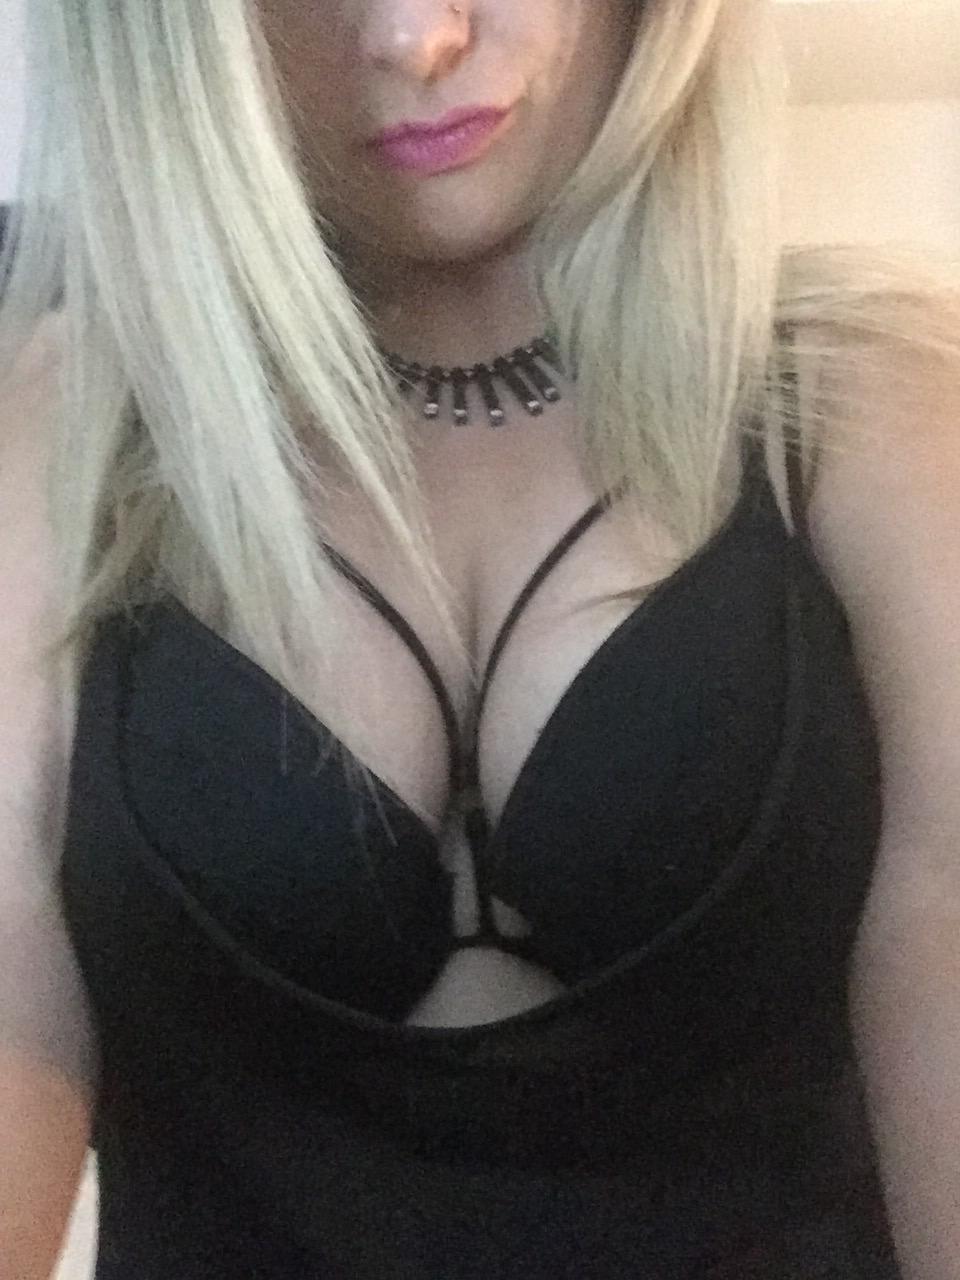 is English, 29 years old with long blonde hair. 34DD bust and size 12.